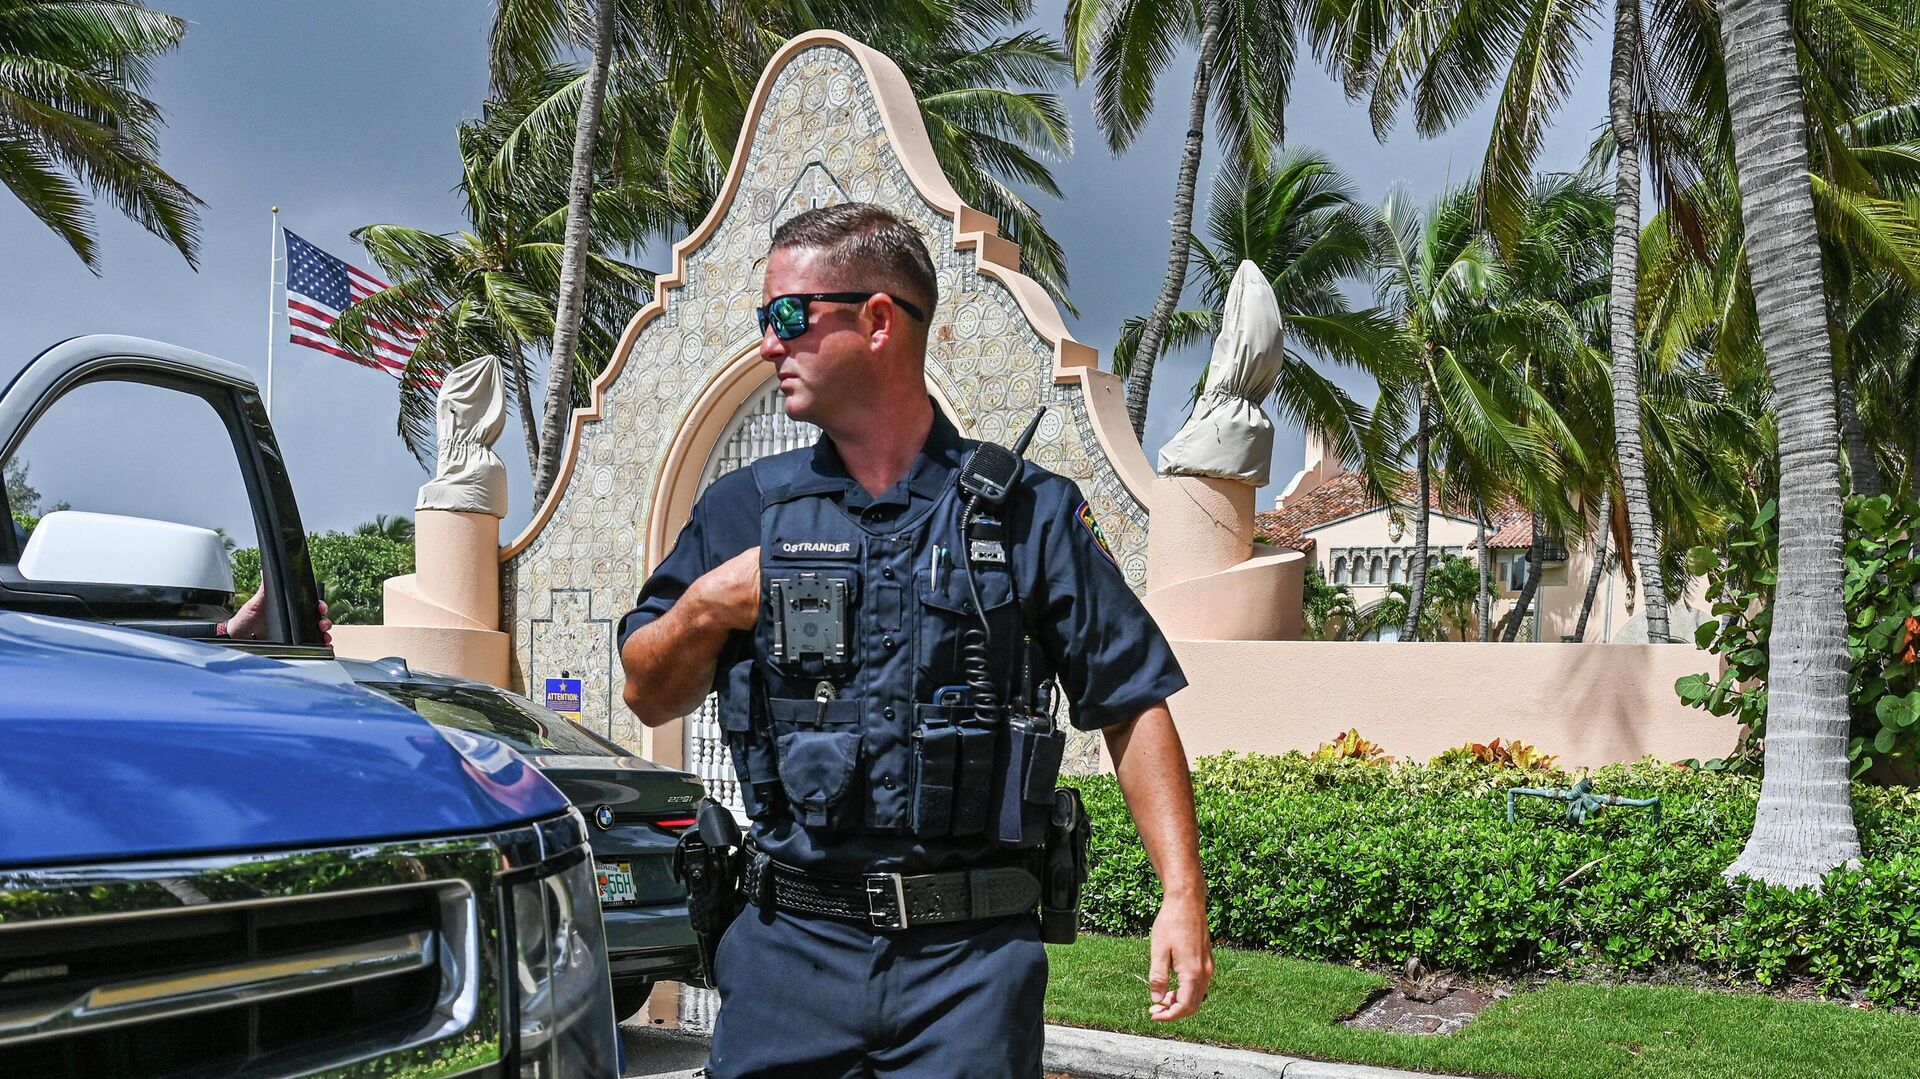 Local law enforcement officers are seen in front of the home of former President Donald Trump at Mar-A-Lago in Palm Beach, Florida on August 9, 2022. - Sputnik International, 1920, 16.08.2022